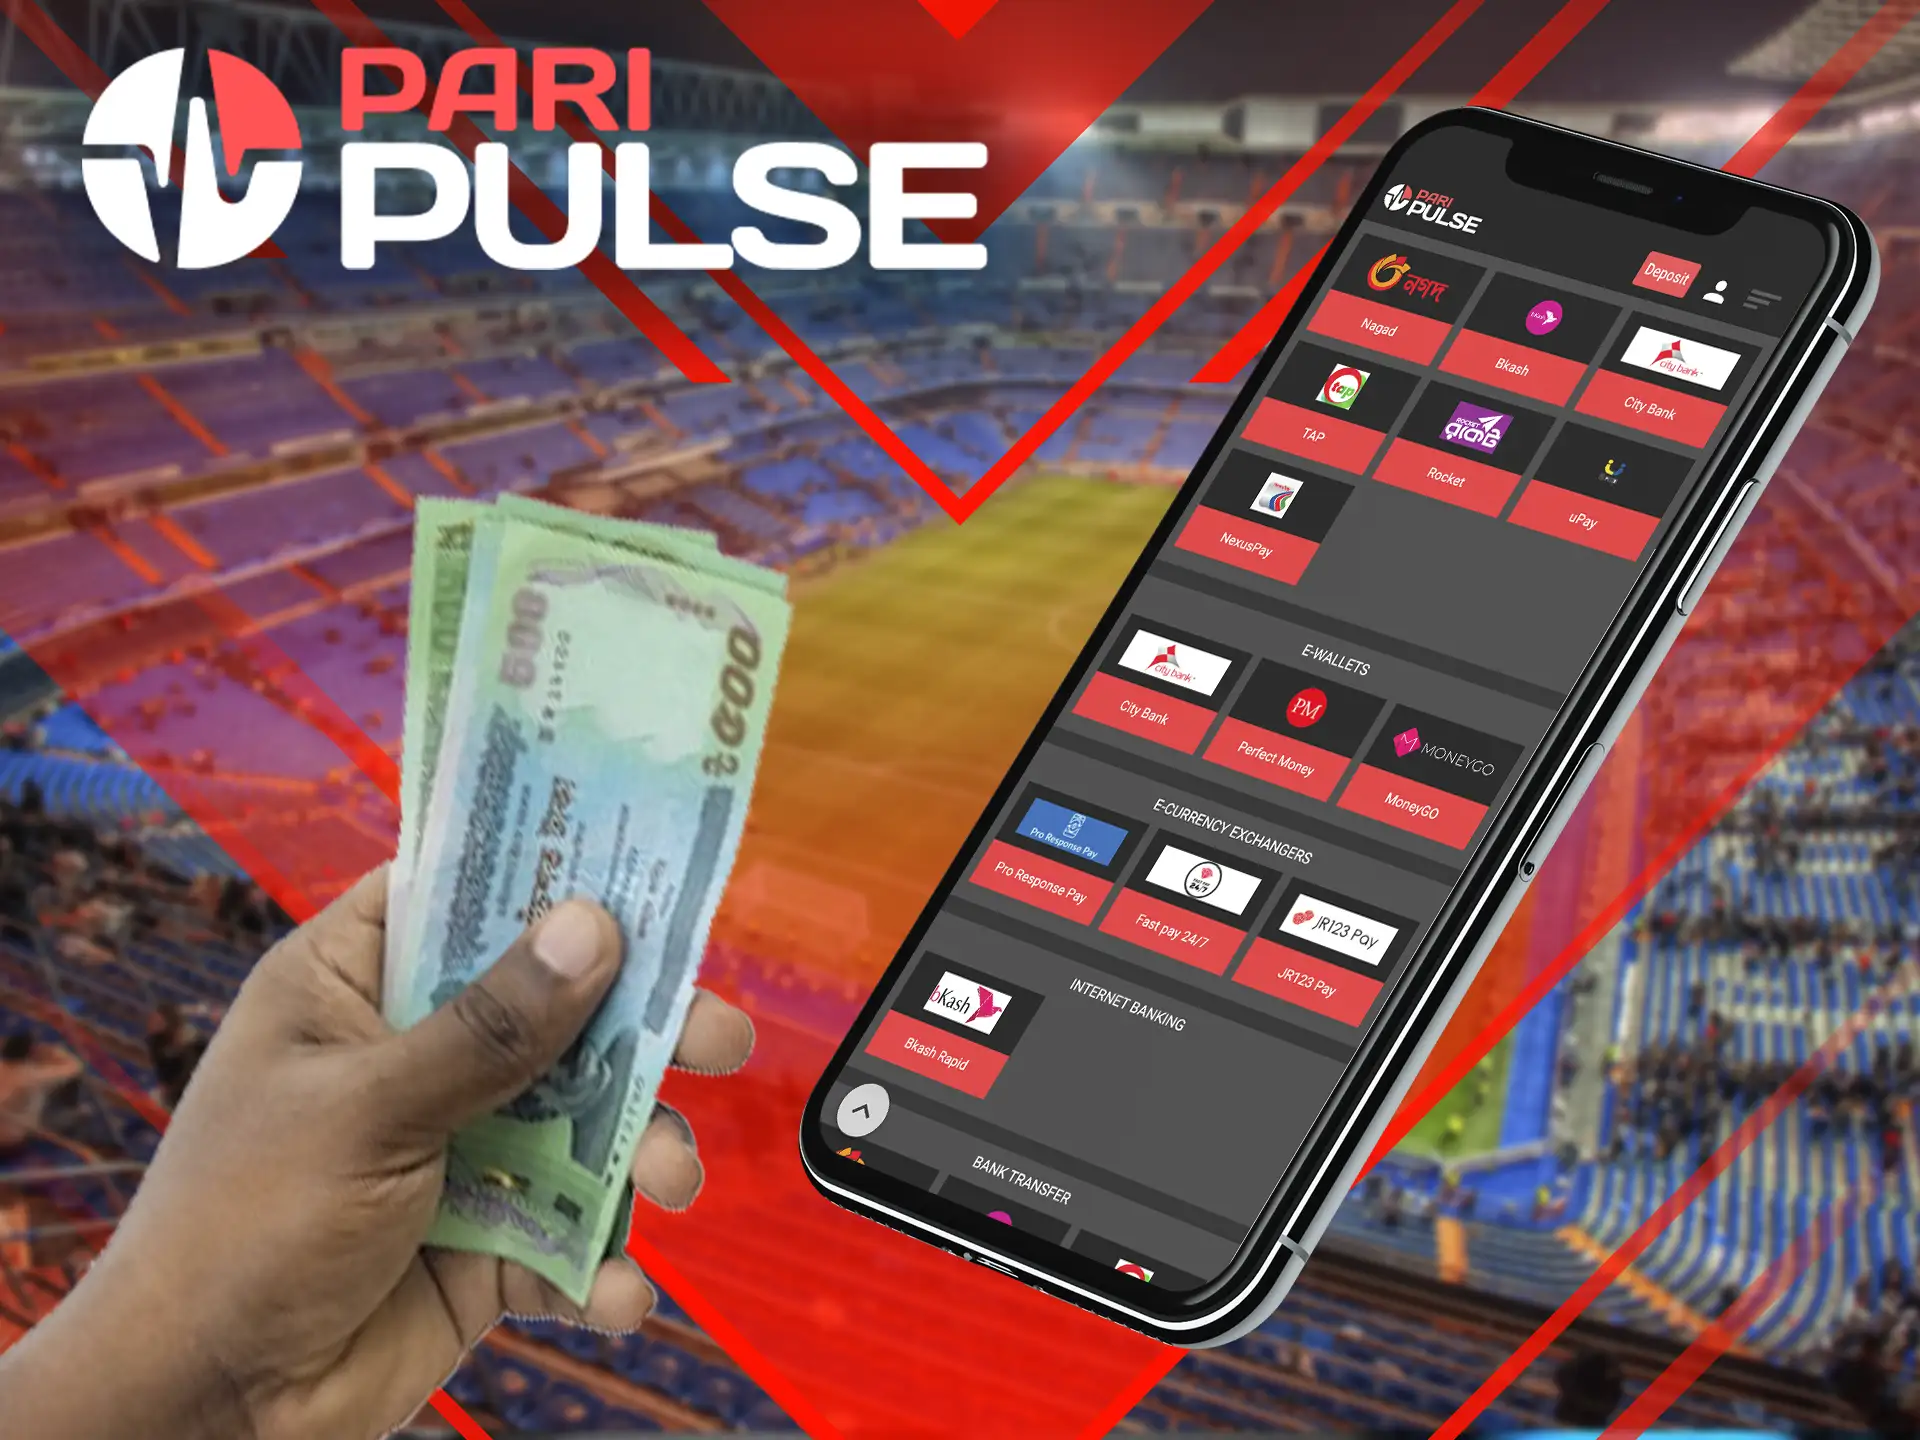 Players from Bangladesh can seamlessly deposit funds into their viral account in PariPulse a convenient way.